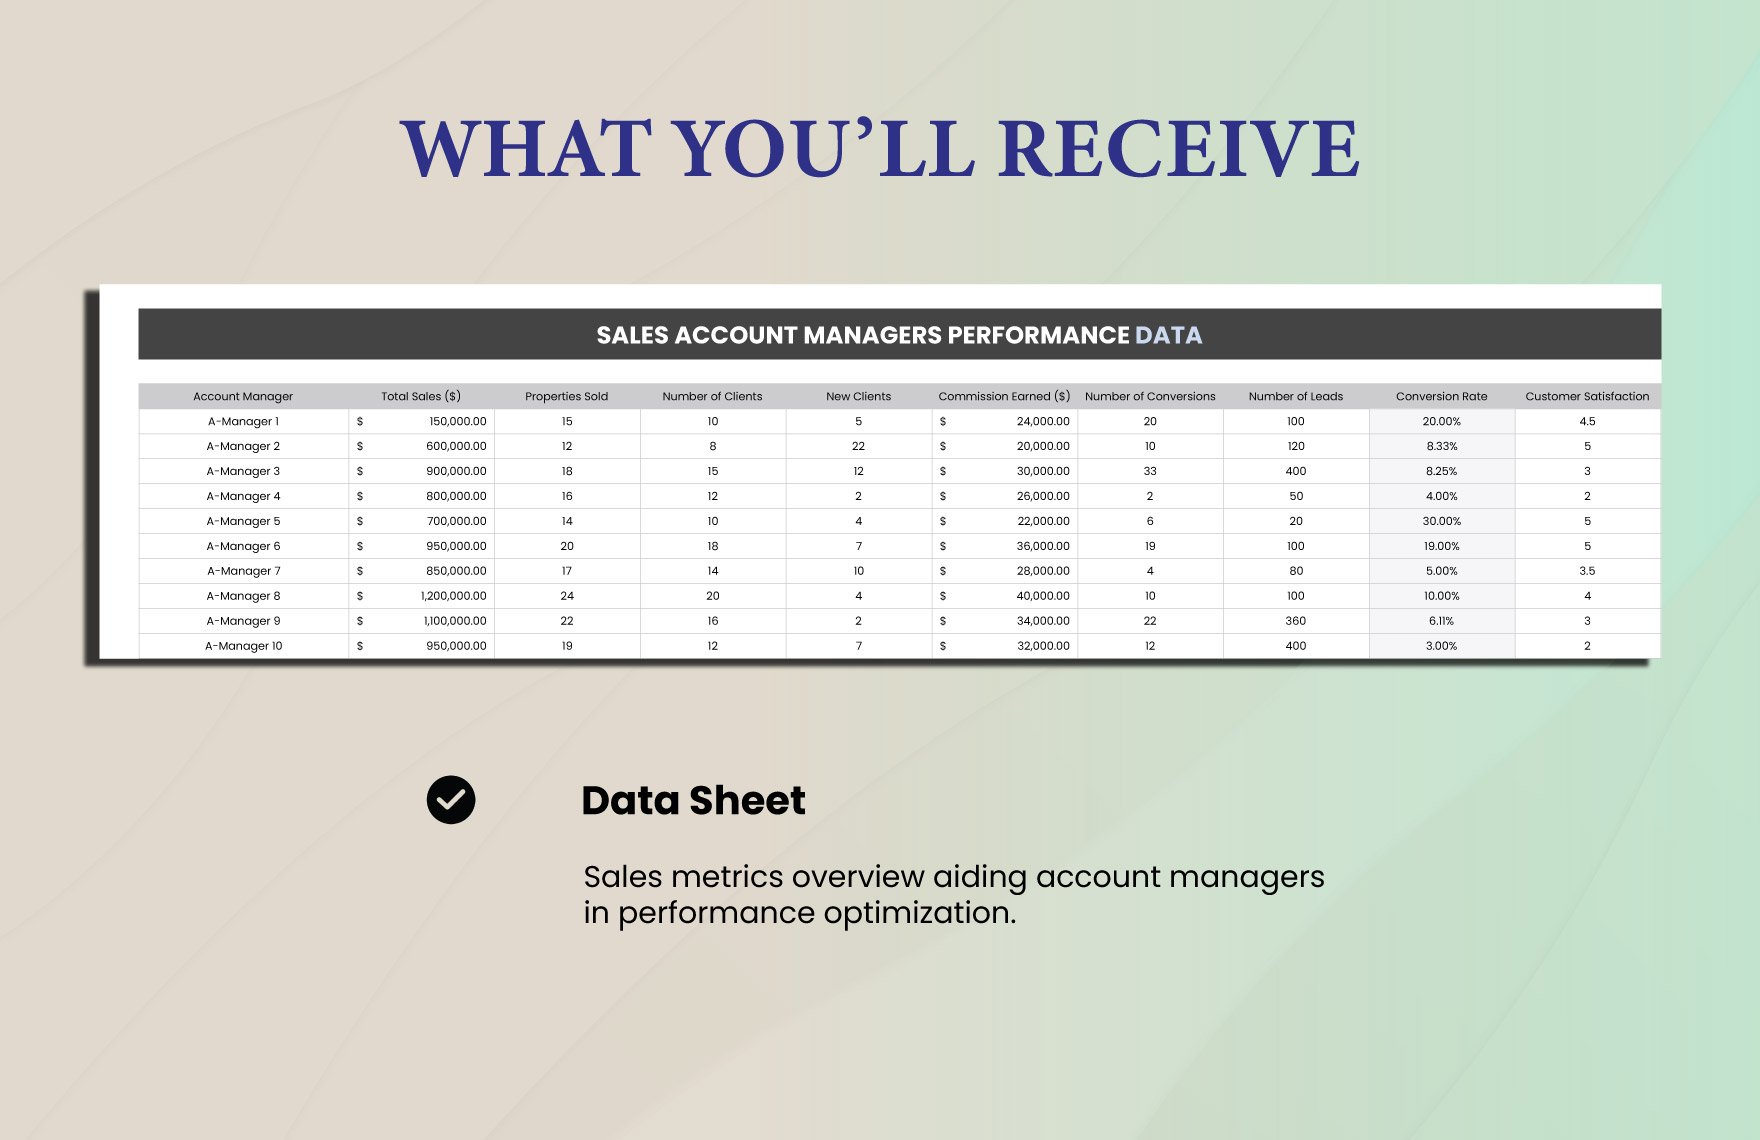 Sales Account Managers Performance Dashboard Template